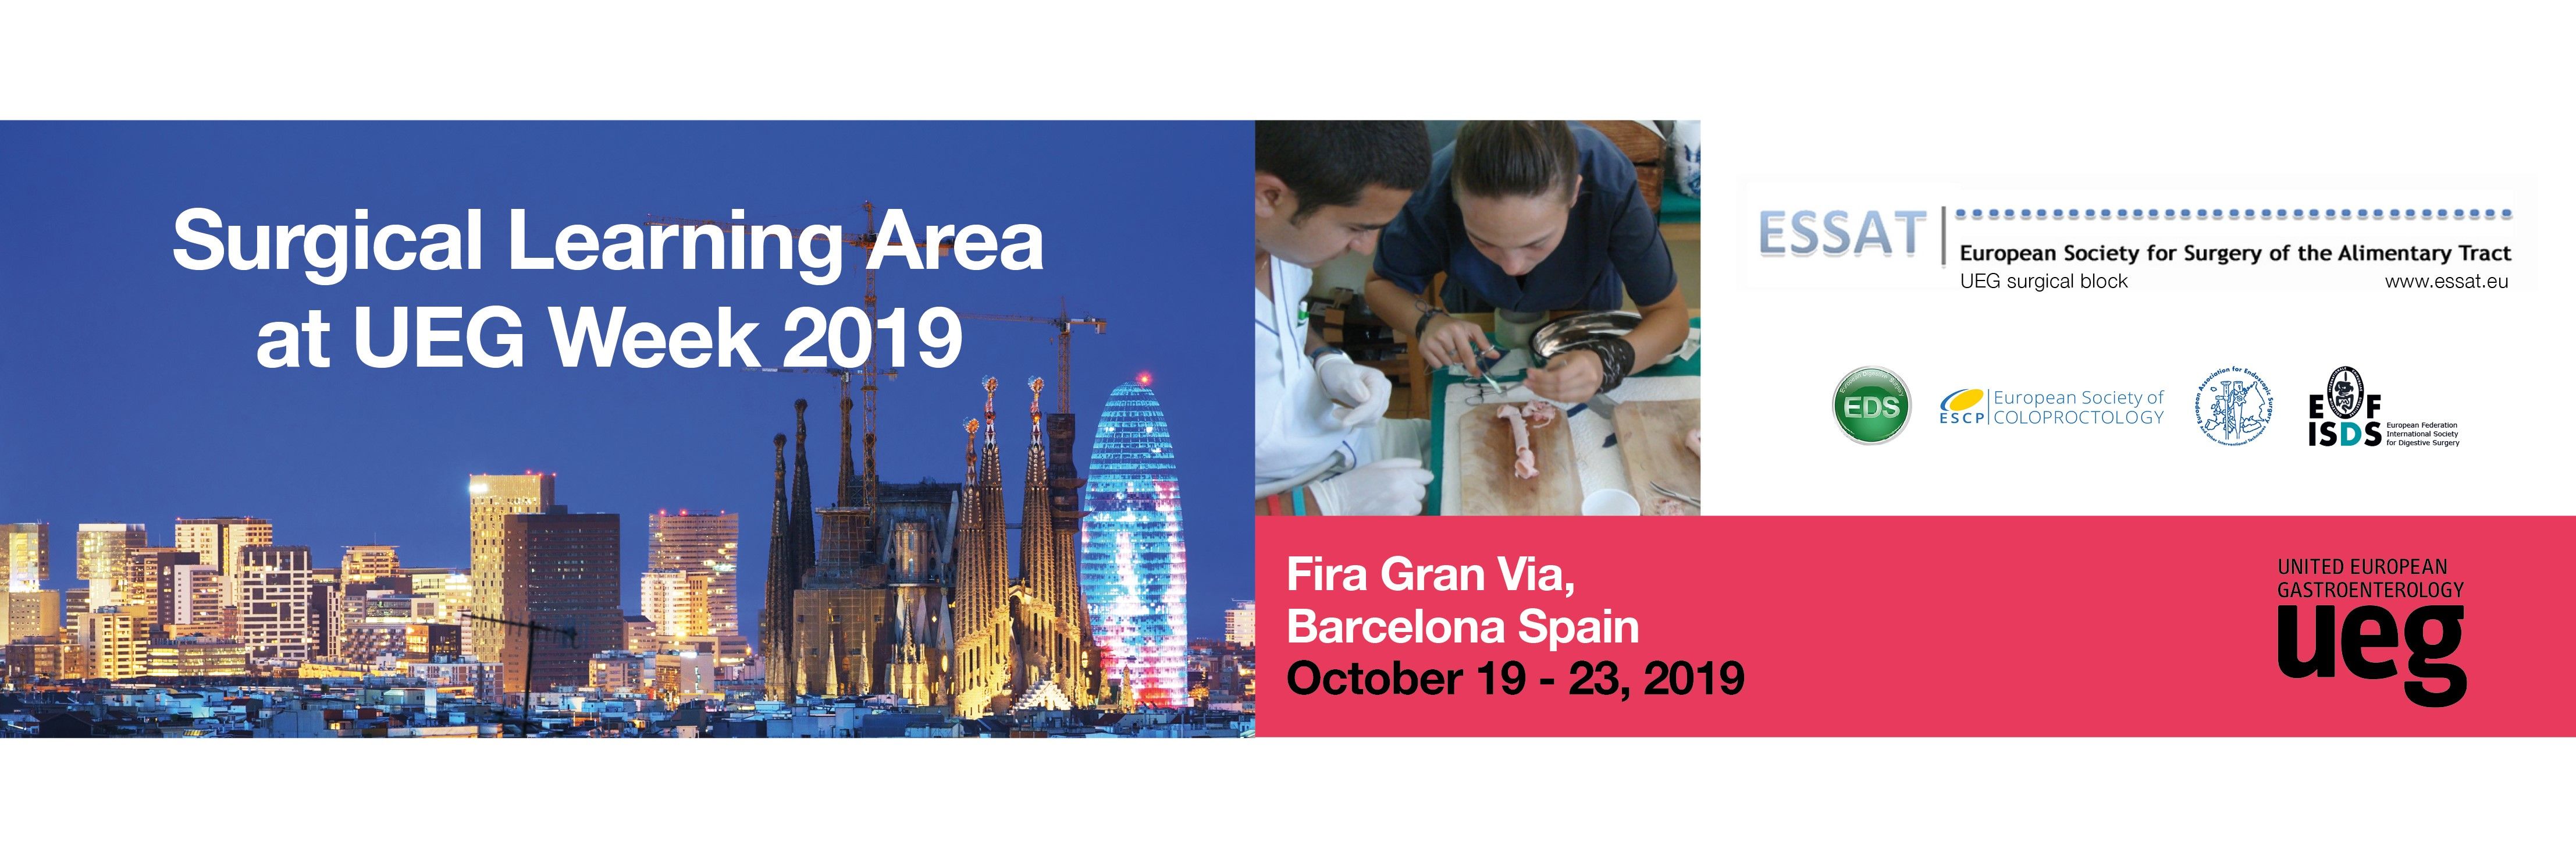 Registration is now open for the UEG Week 2019 Surgical Learning Area